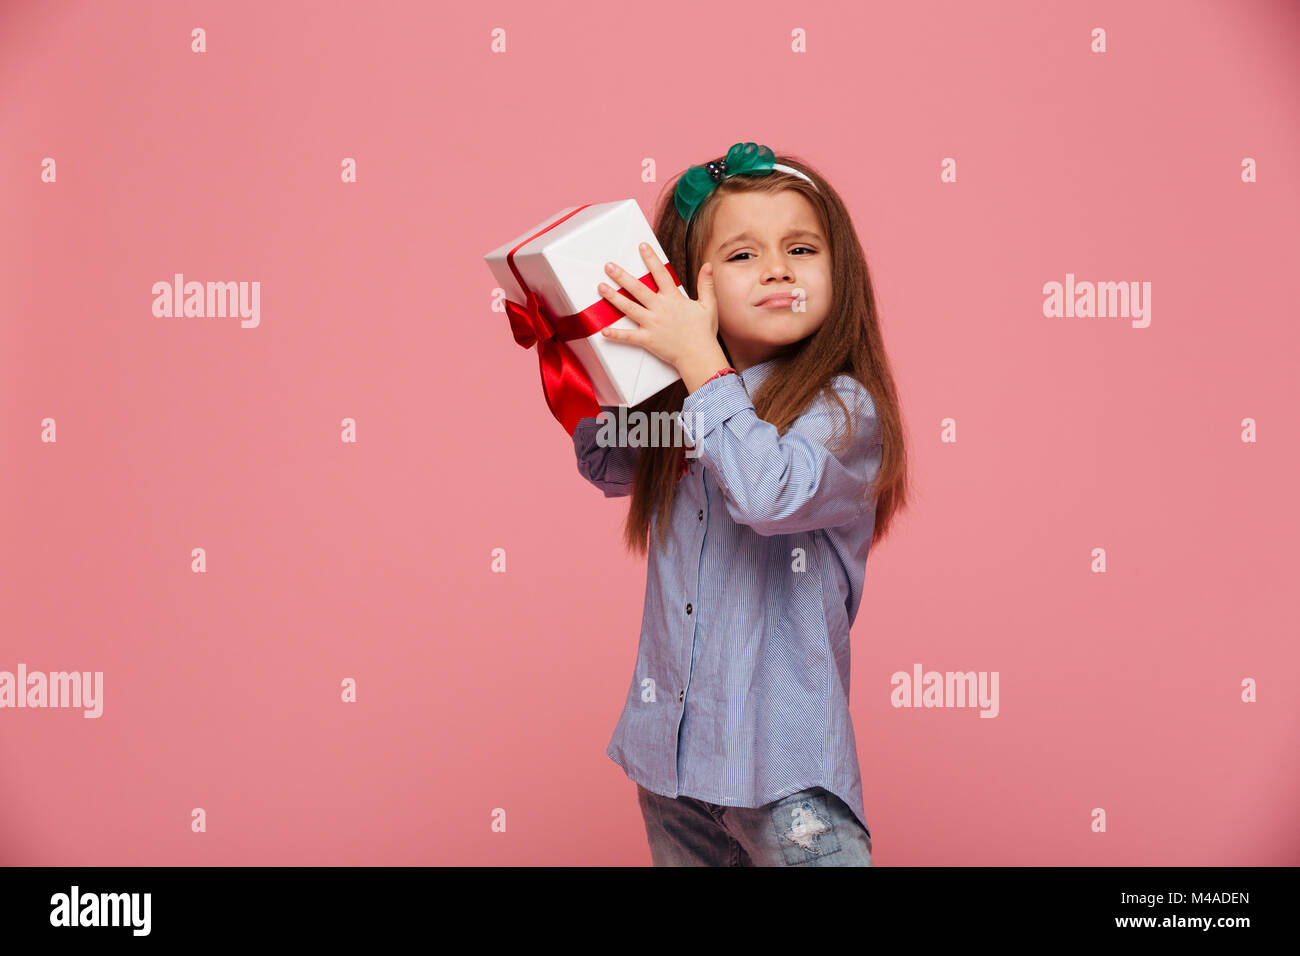 Curious girl 5-6 years shaking present gift-wrapped box close to ear, trying to determine what's inside over pink background Stock Photo